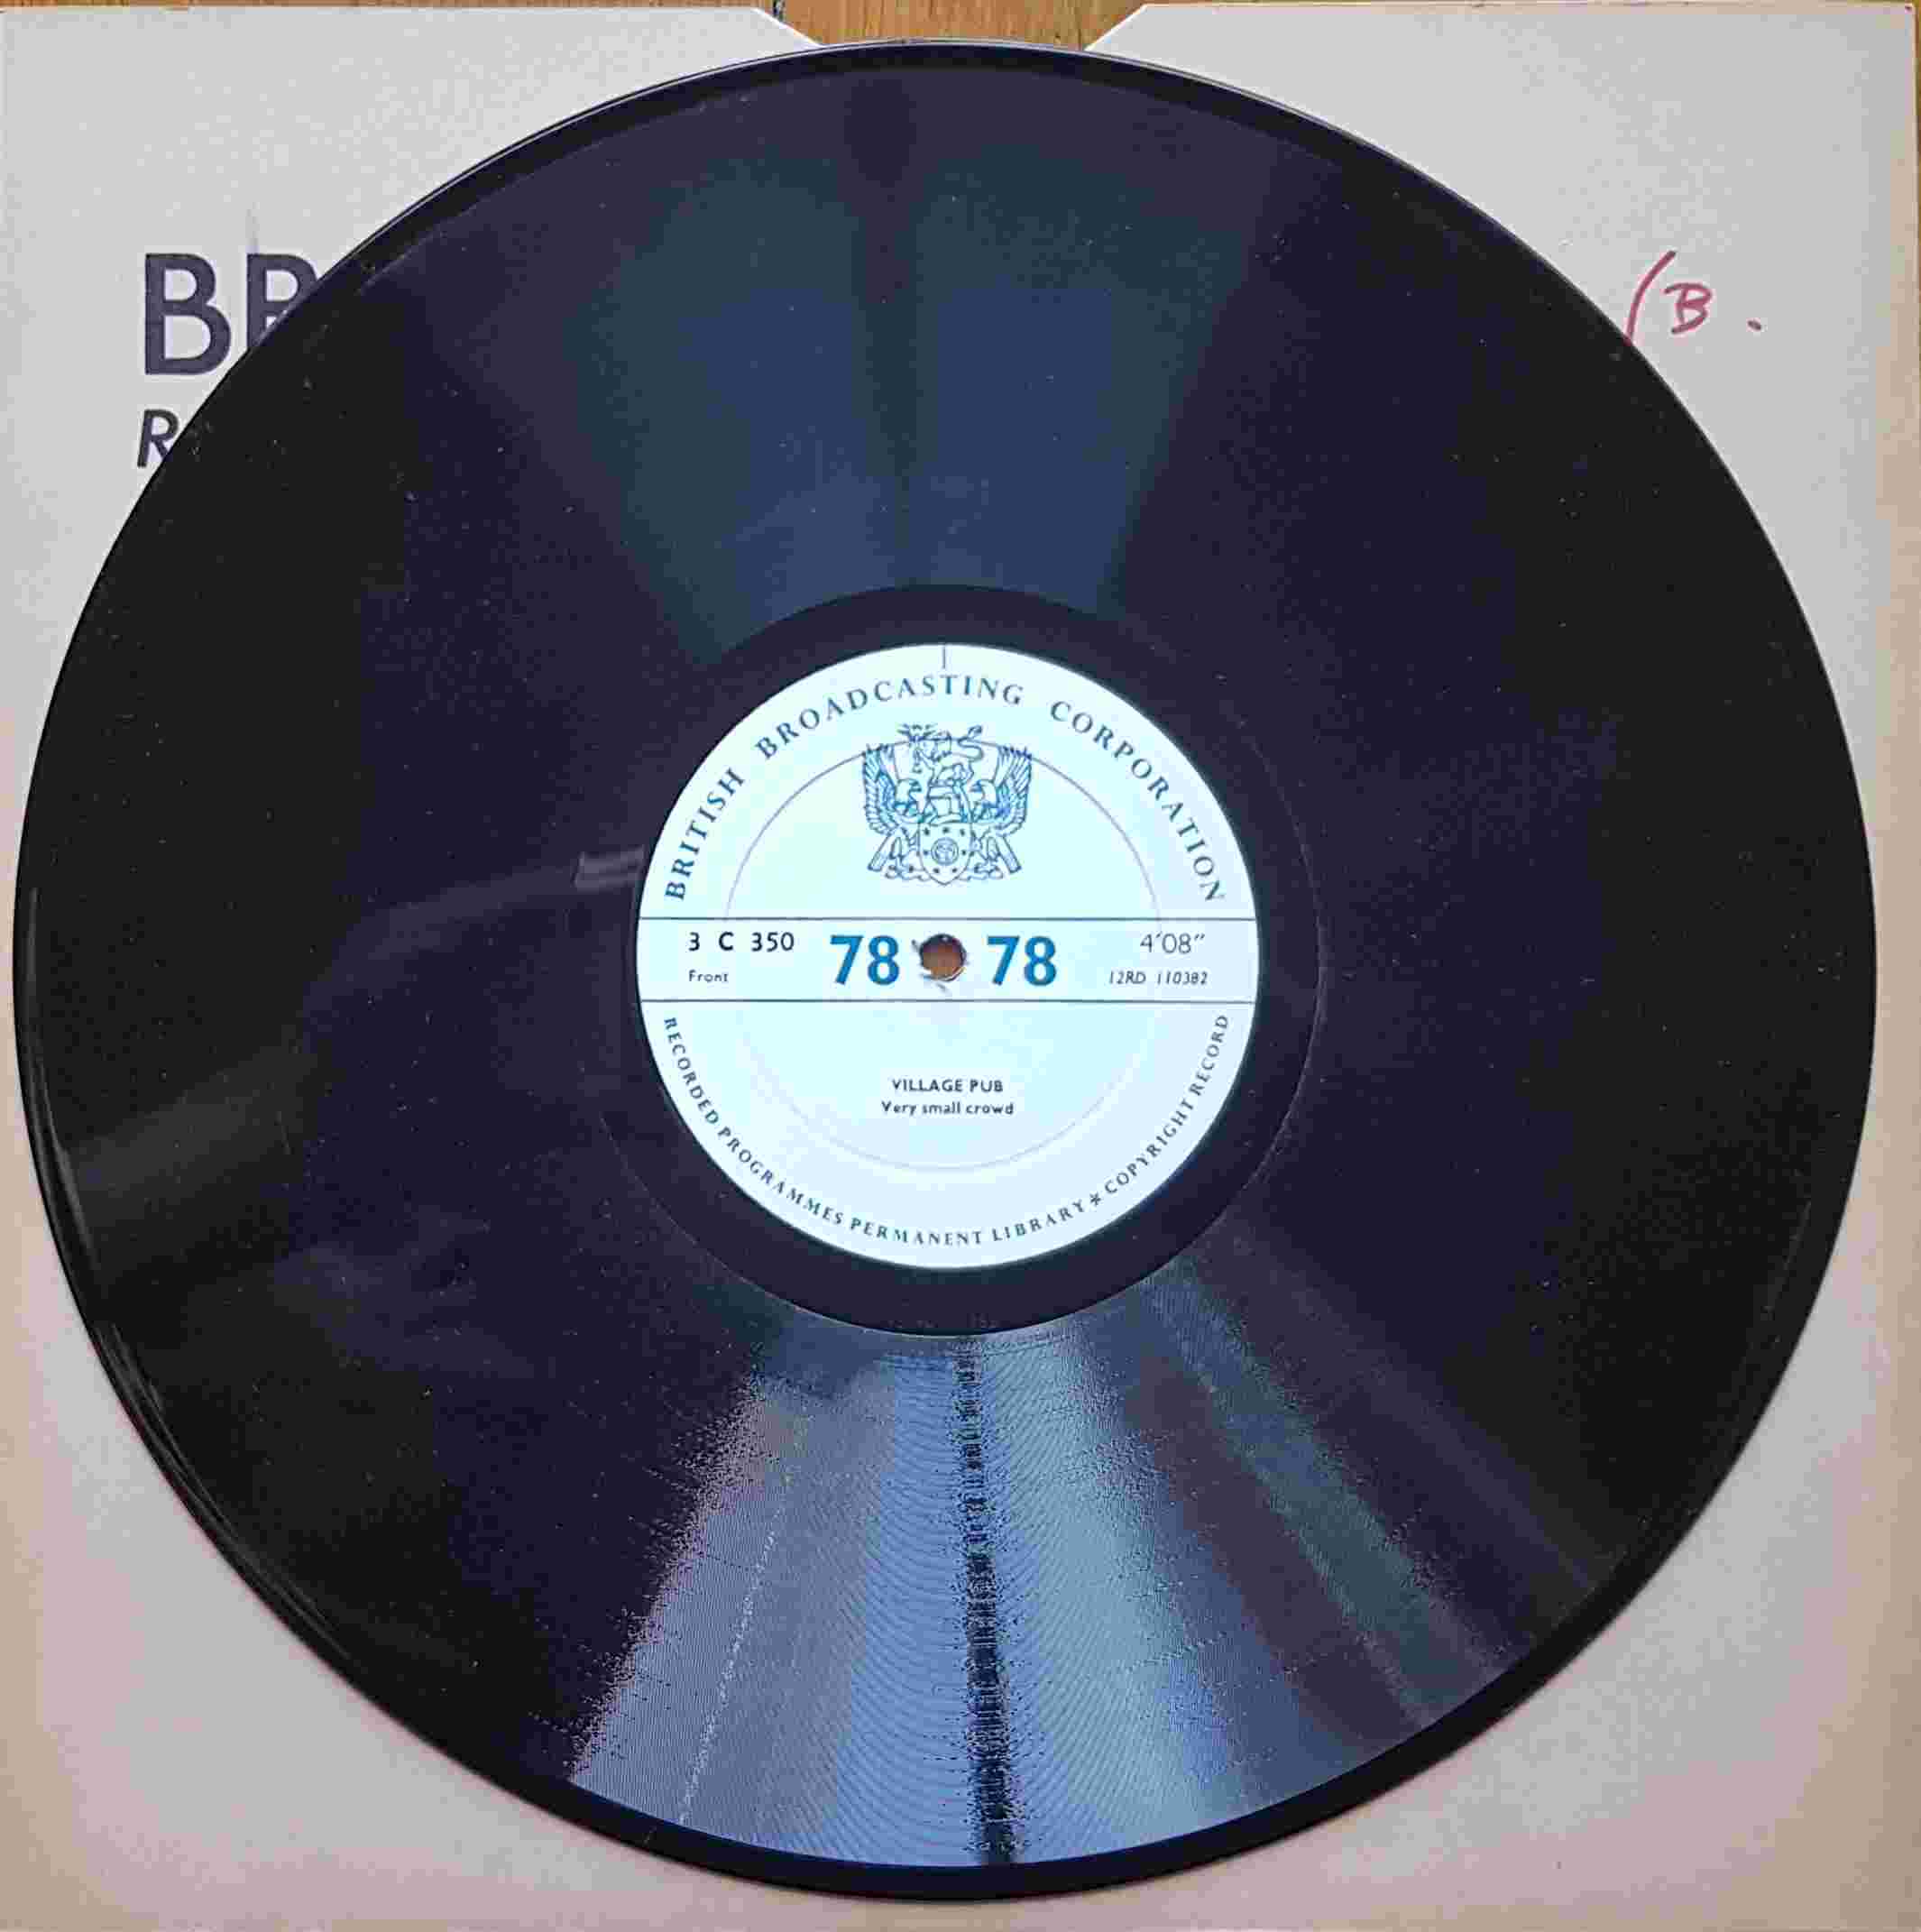 Picture of 3 C 350 Village pub / Cocktail party by artist Not registered from the BBC 78 - Records and Tapes library